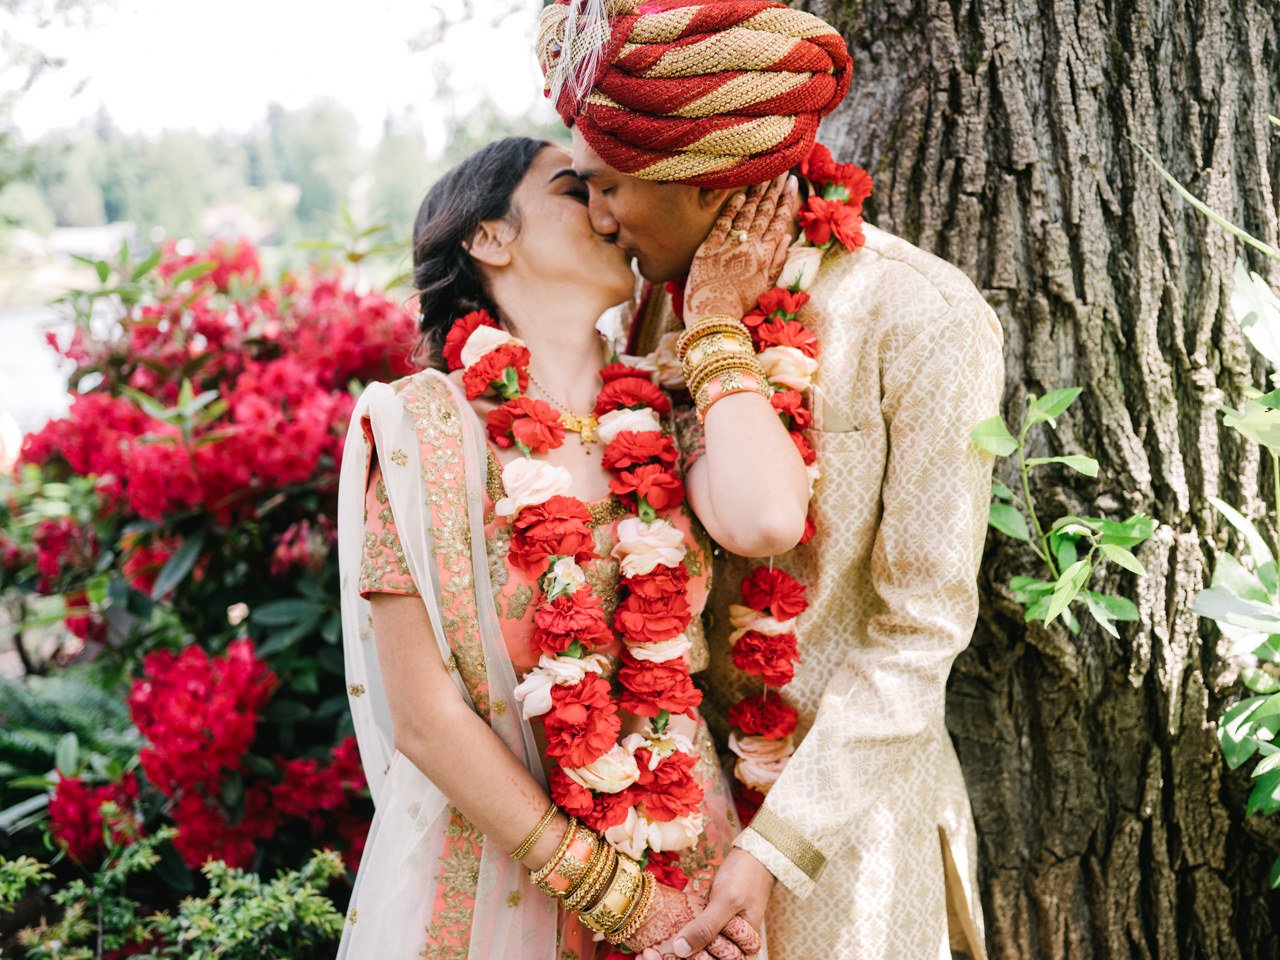  Indian couple shares kiss by tree with red and gold attire and red rhododendrons behind them 